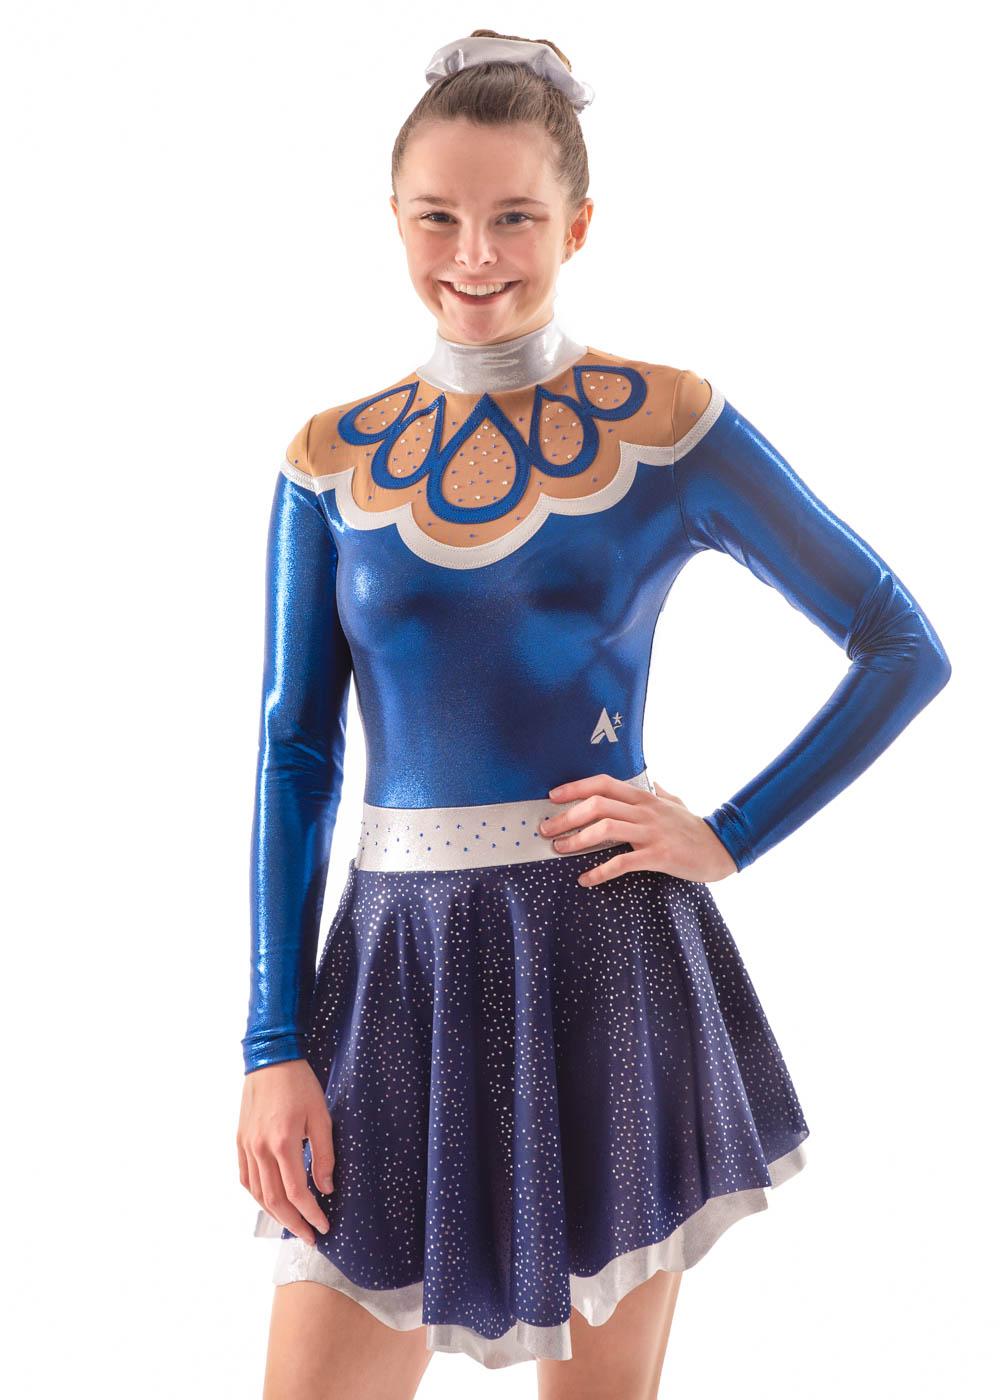 MAELYS- MAJ504:- Ladies Skirted Leotard in Navy shimmer with Silver ...